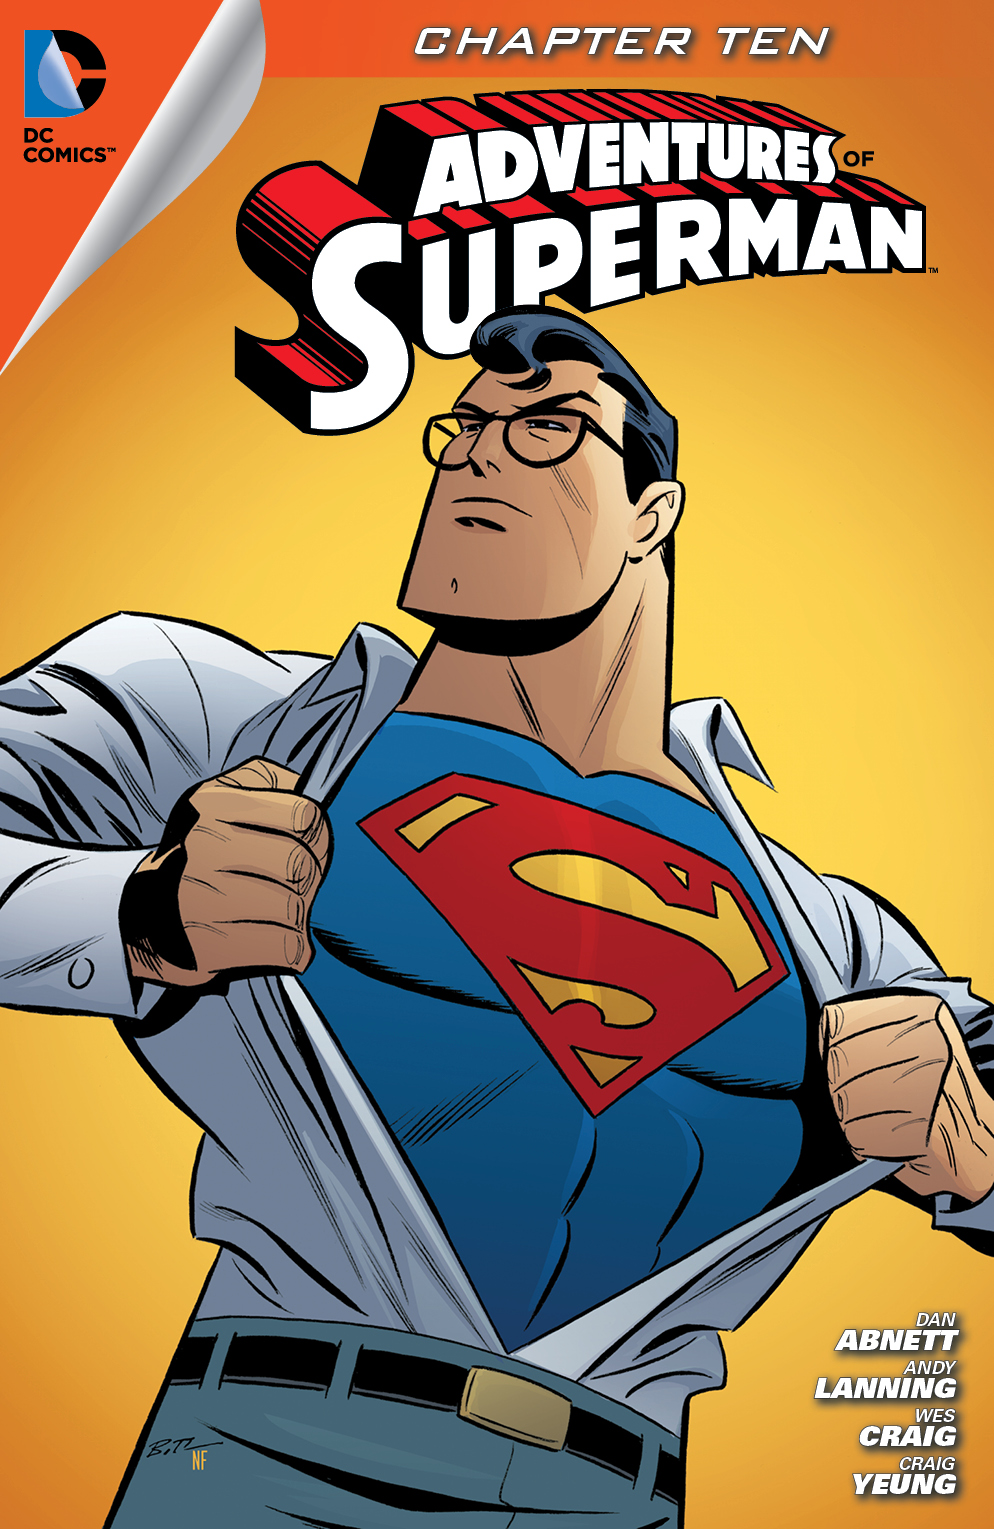 Adventures of Superman (2013-) #10 preview images